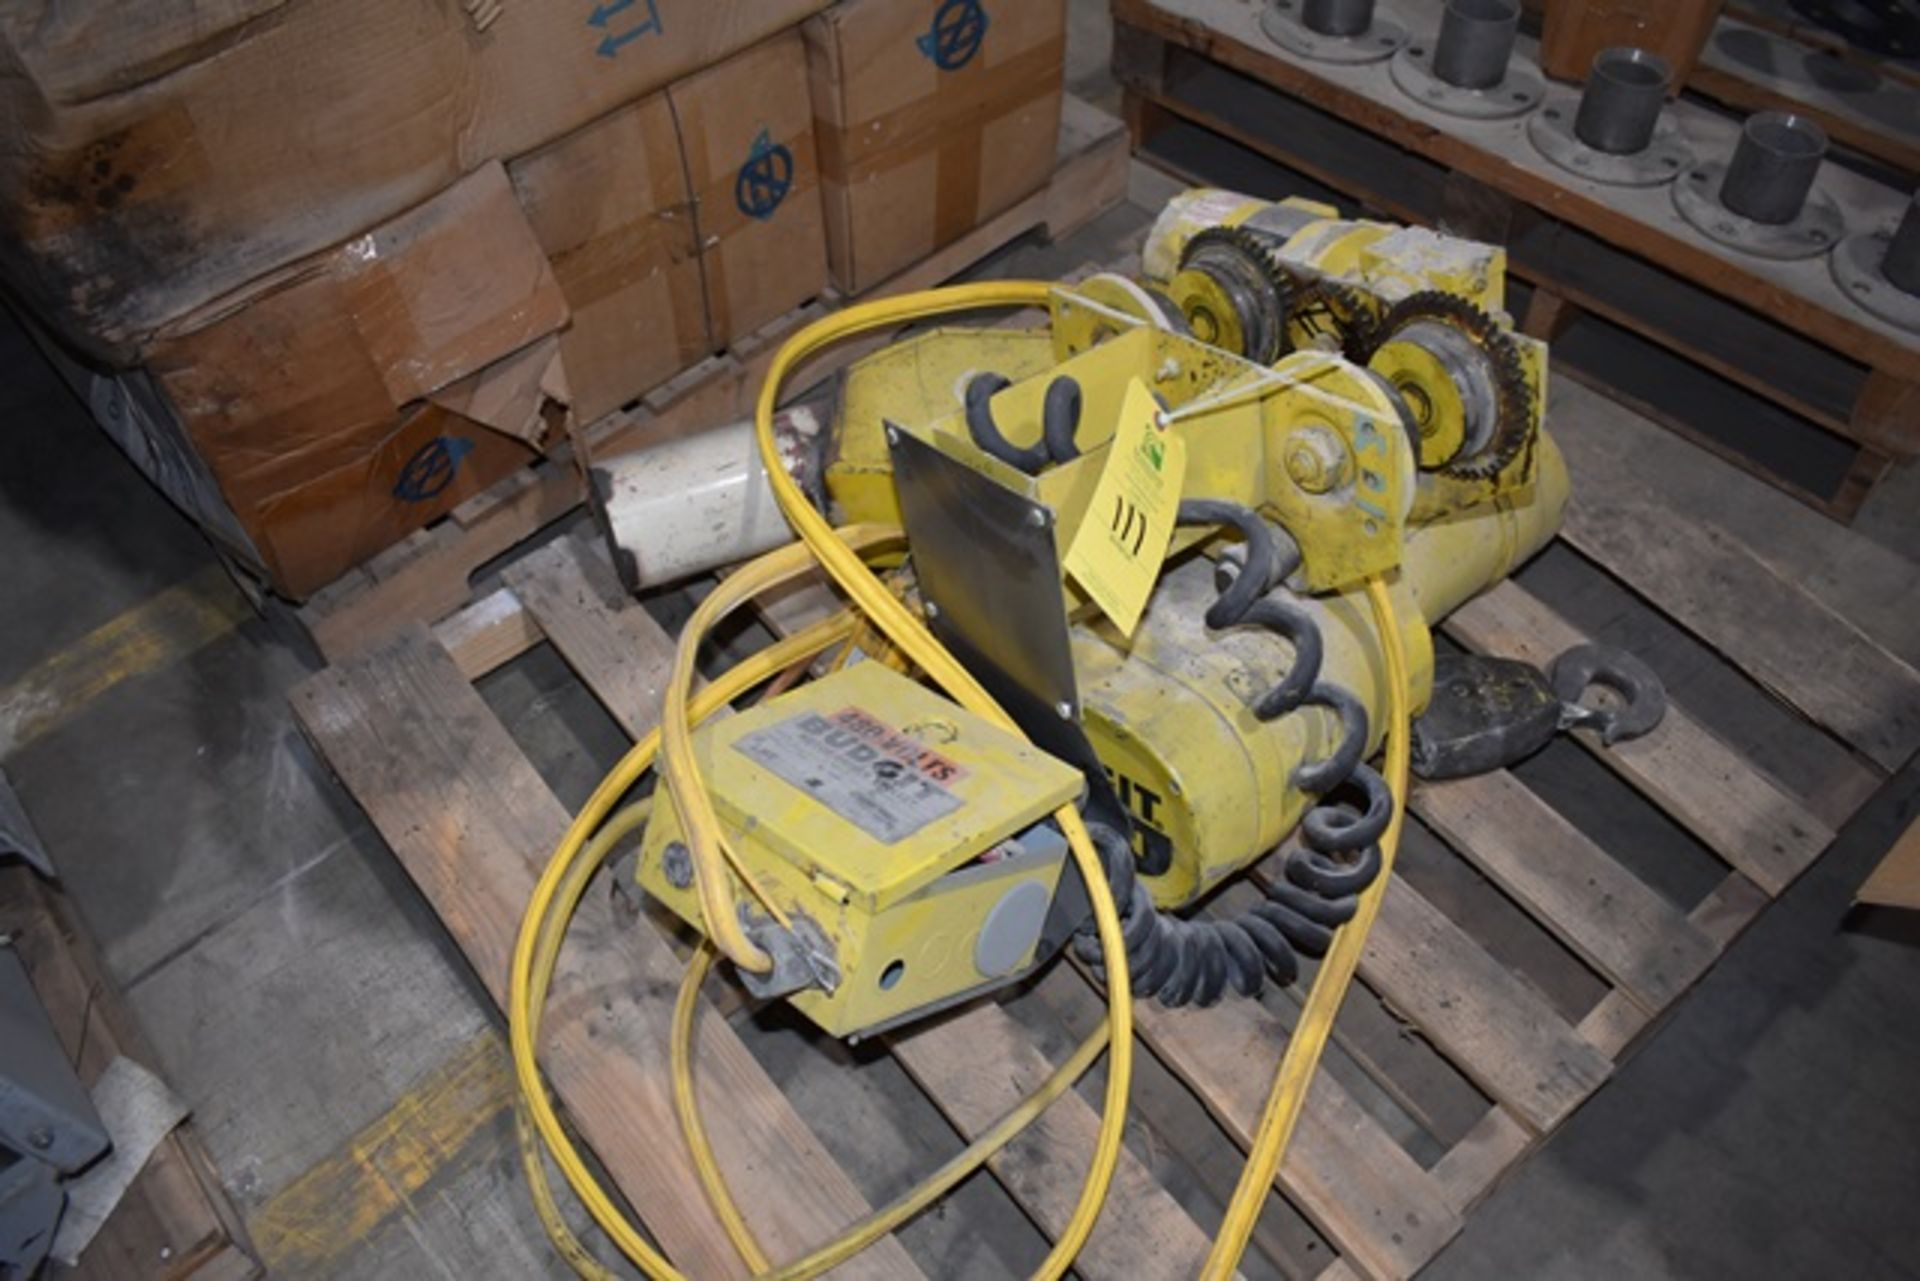 Budgit 2 Ton Chain Hoist Includes Budgit Motor Driven Trolley. Rigging/Loading Fee: $25